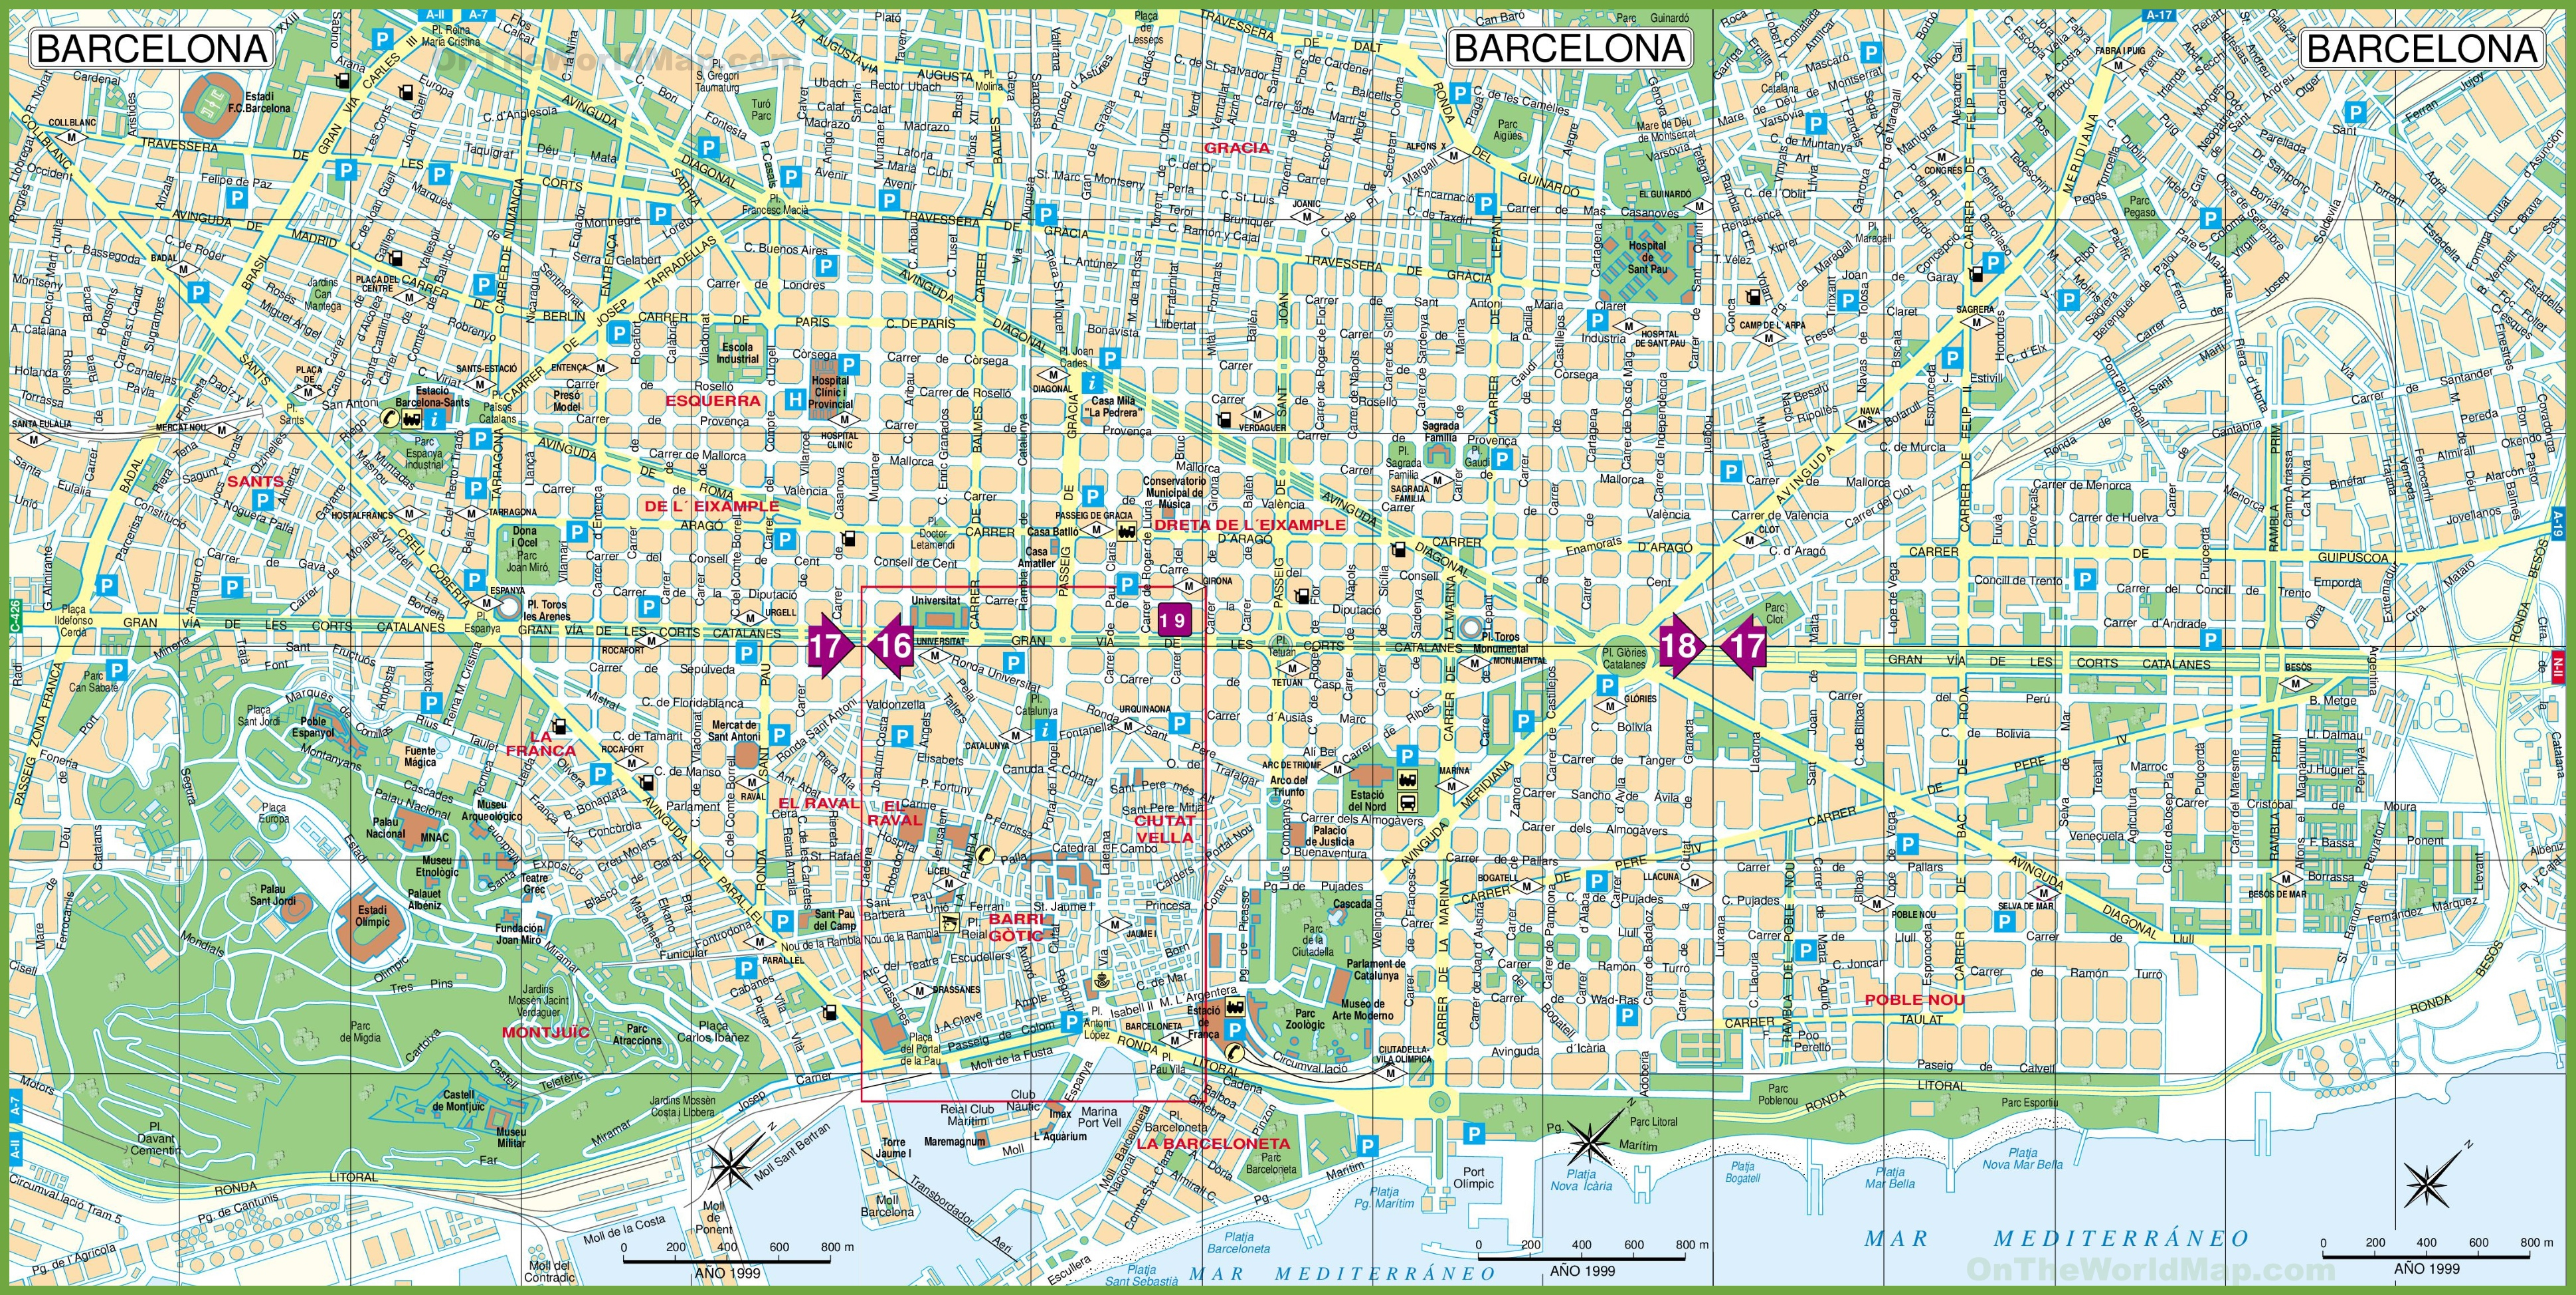 Barcelona Street Map And Travel Information | Download Free - Printable City Street Maps